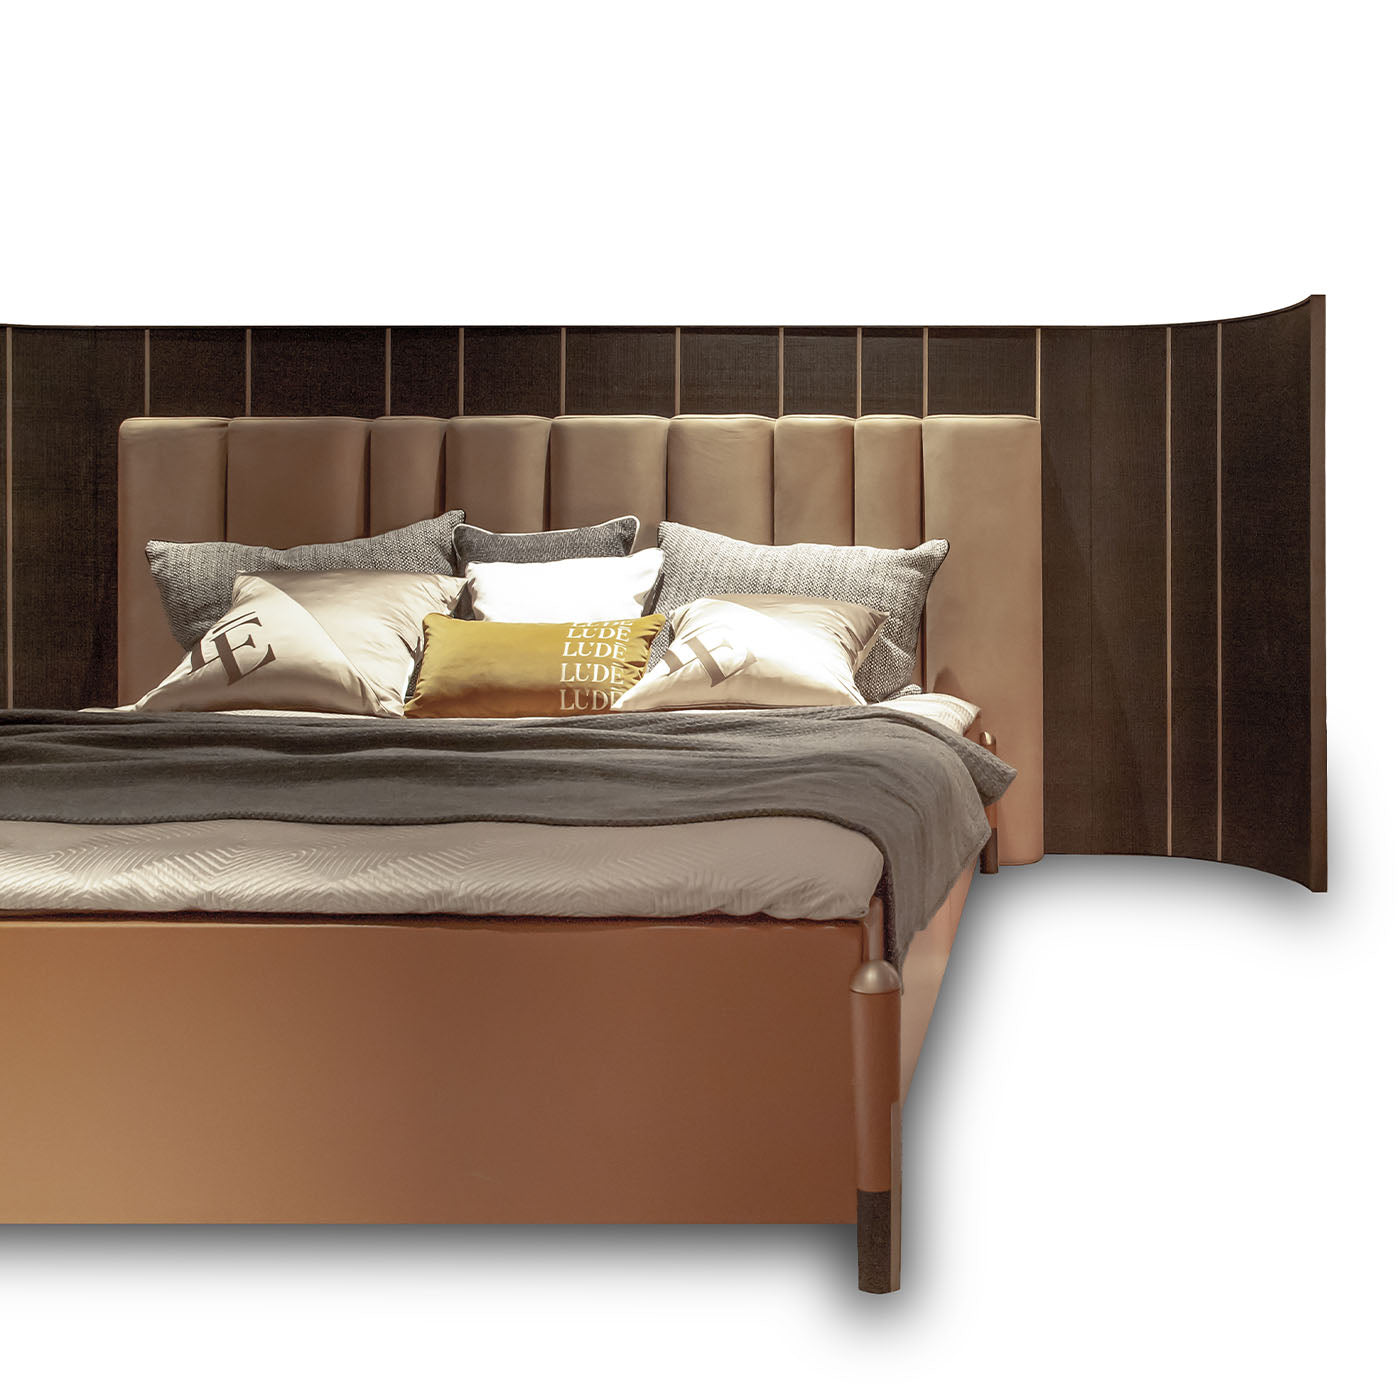 LeLude Collection Bed - Alternative view 1